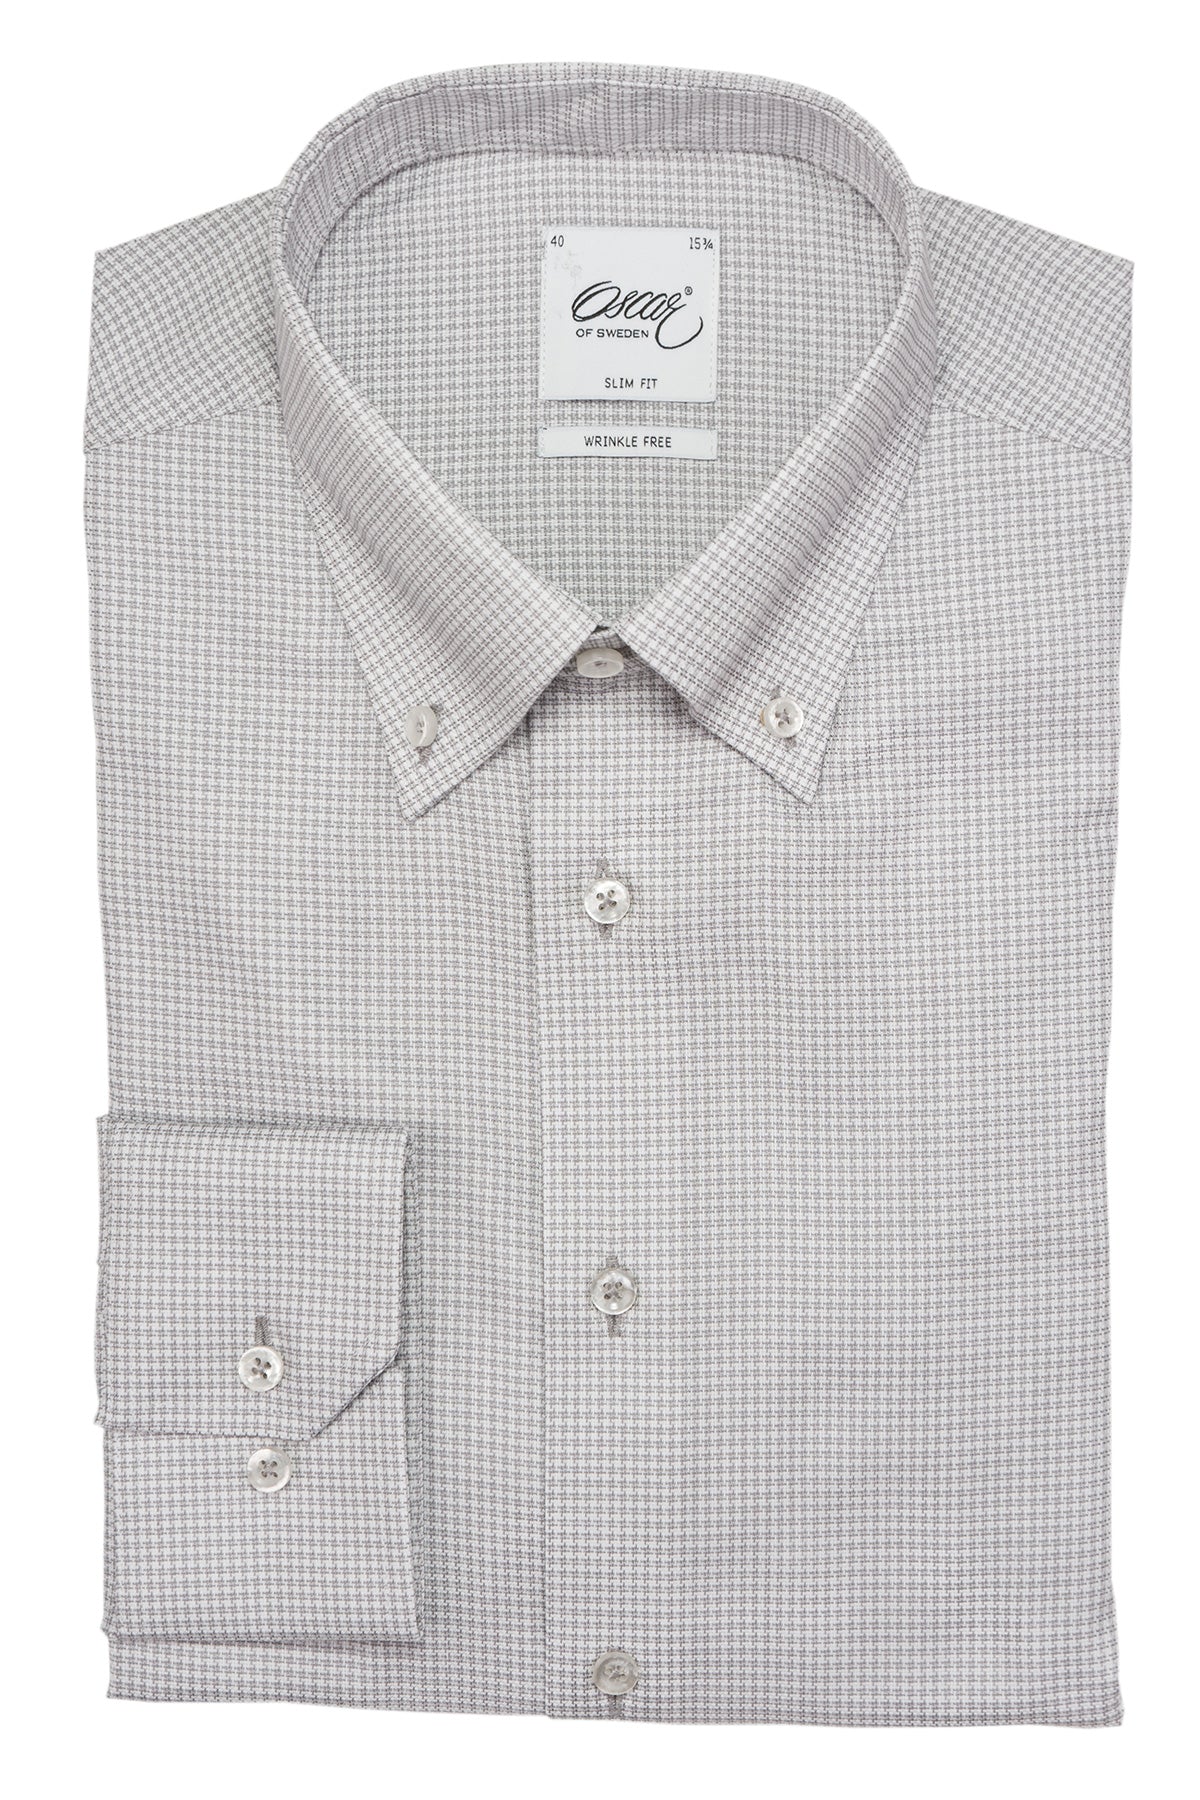 Grey houndstooth button down slim fit shirt